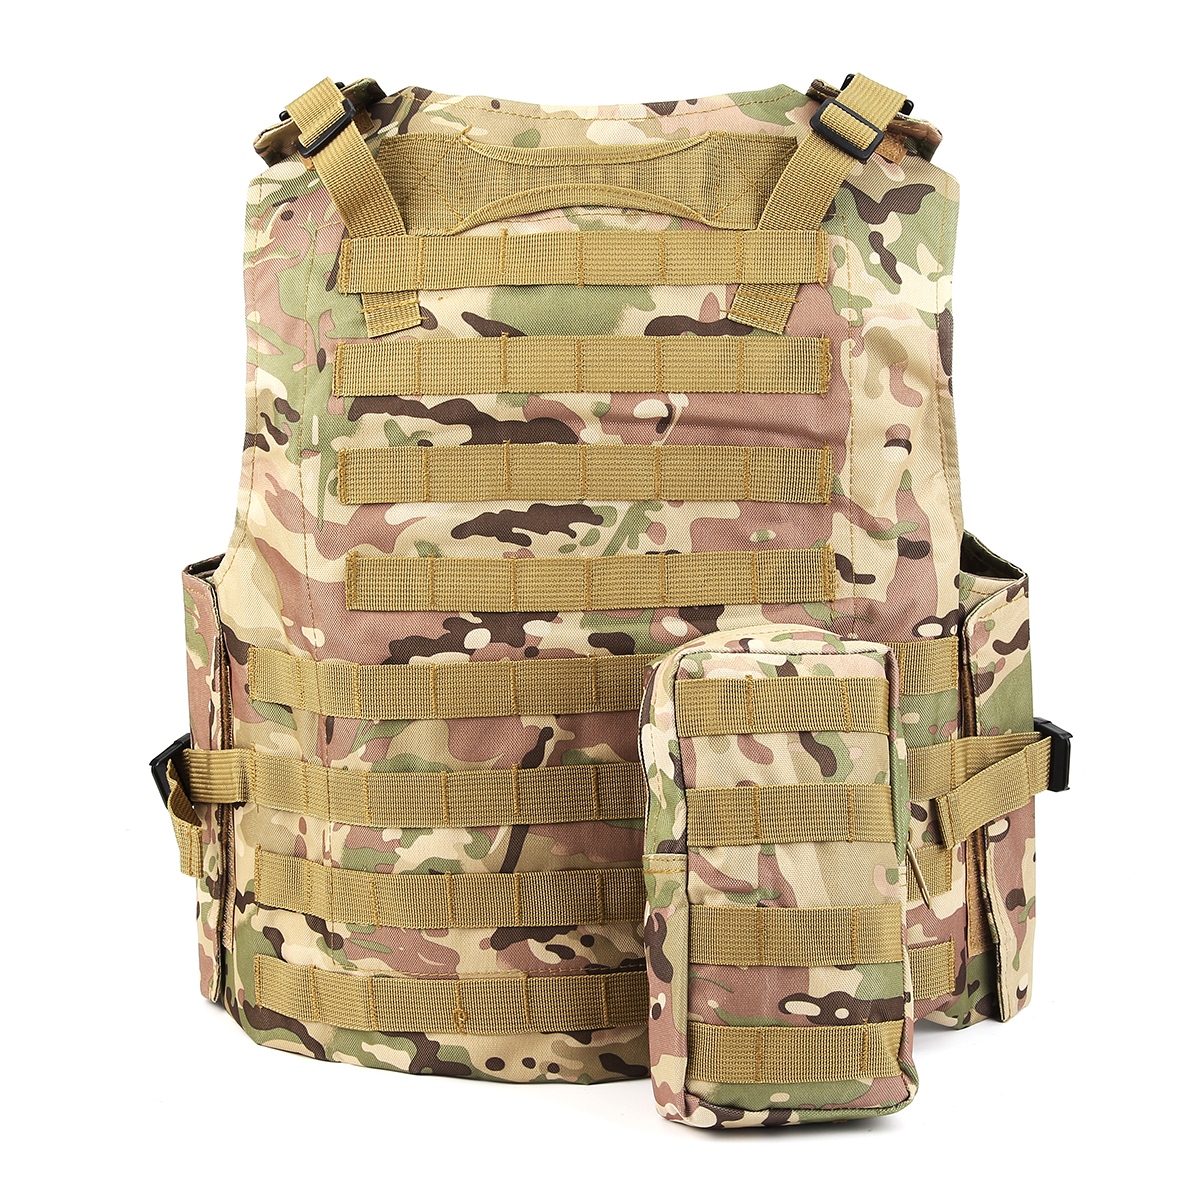 Military-Tactical-Vest-Molle-Combat-Assault-Plate-Carrier-Tactical-Vest-CS-Outdoor-Clothing-Hunting--1817235-4